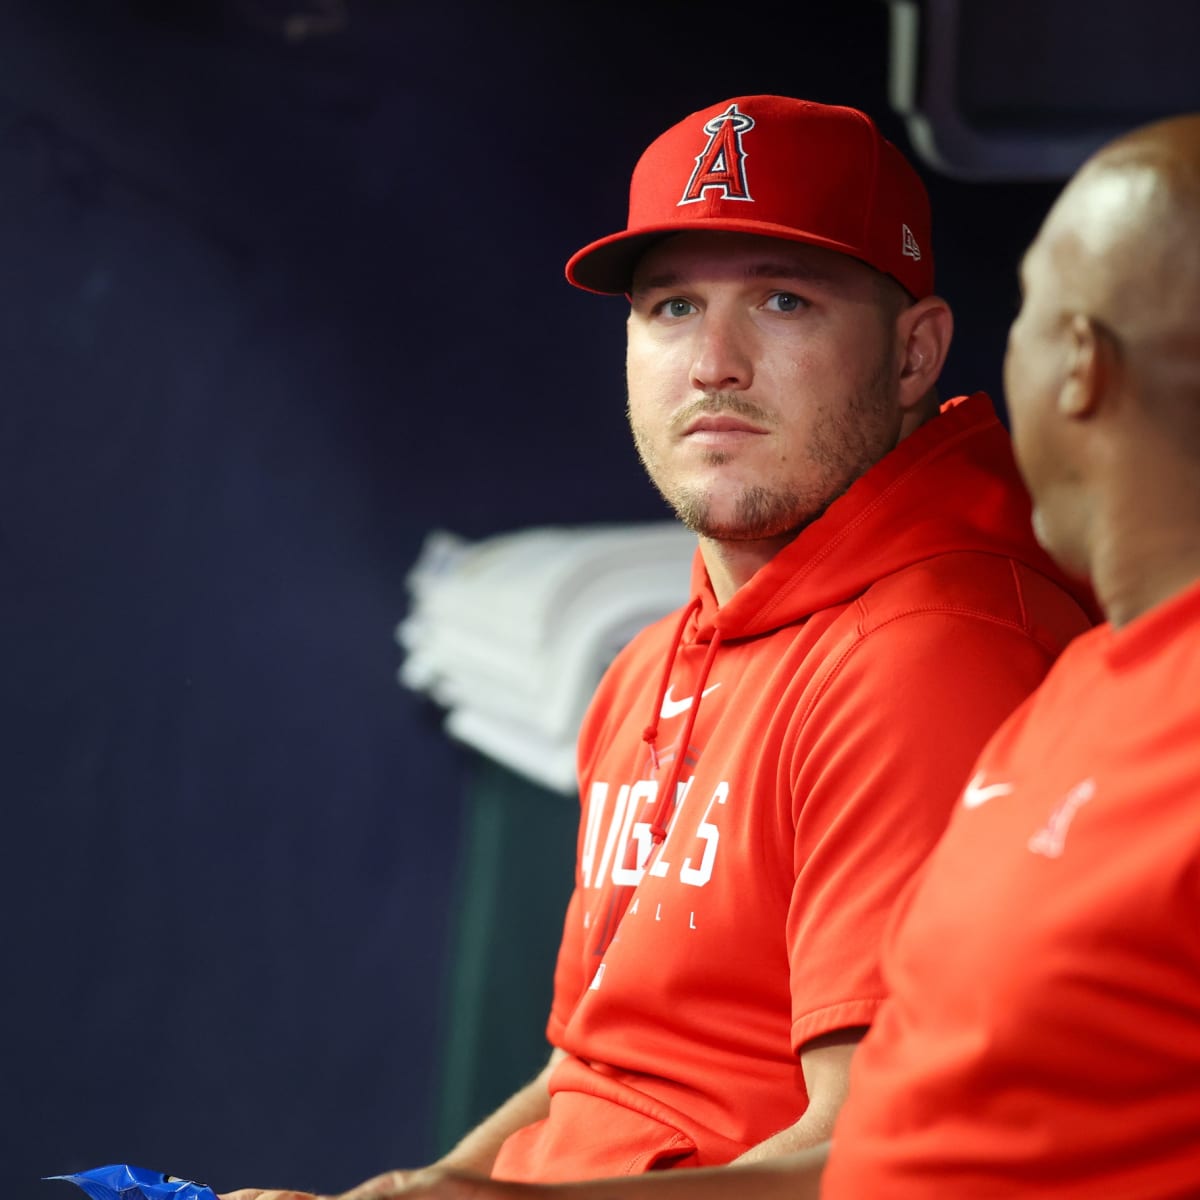 Angels news: Mike Trout progressing well from calf injury - Halos